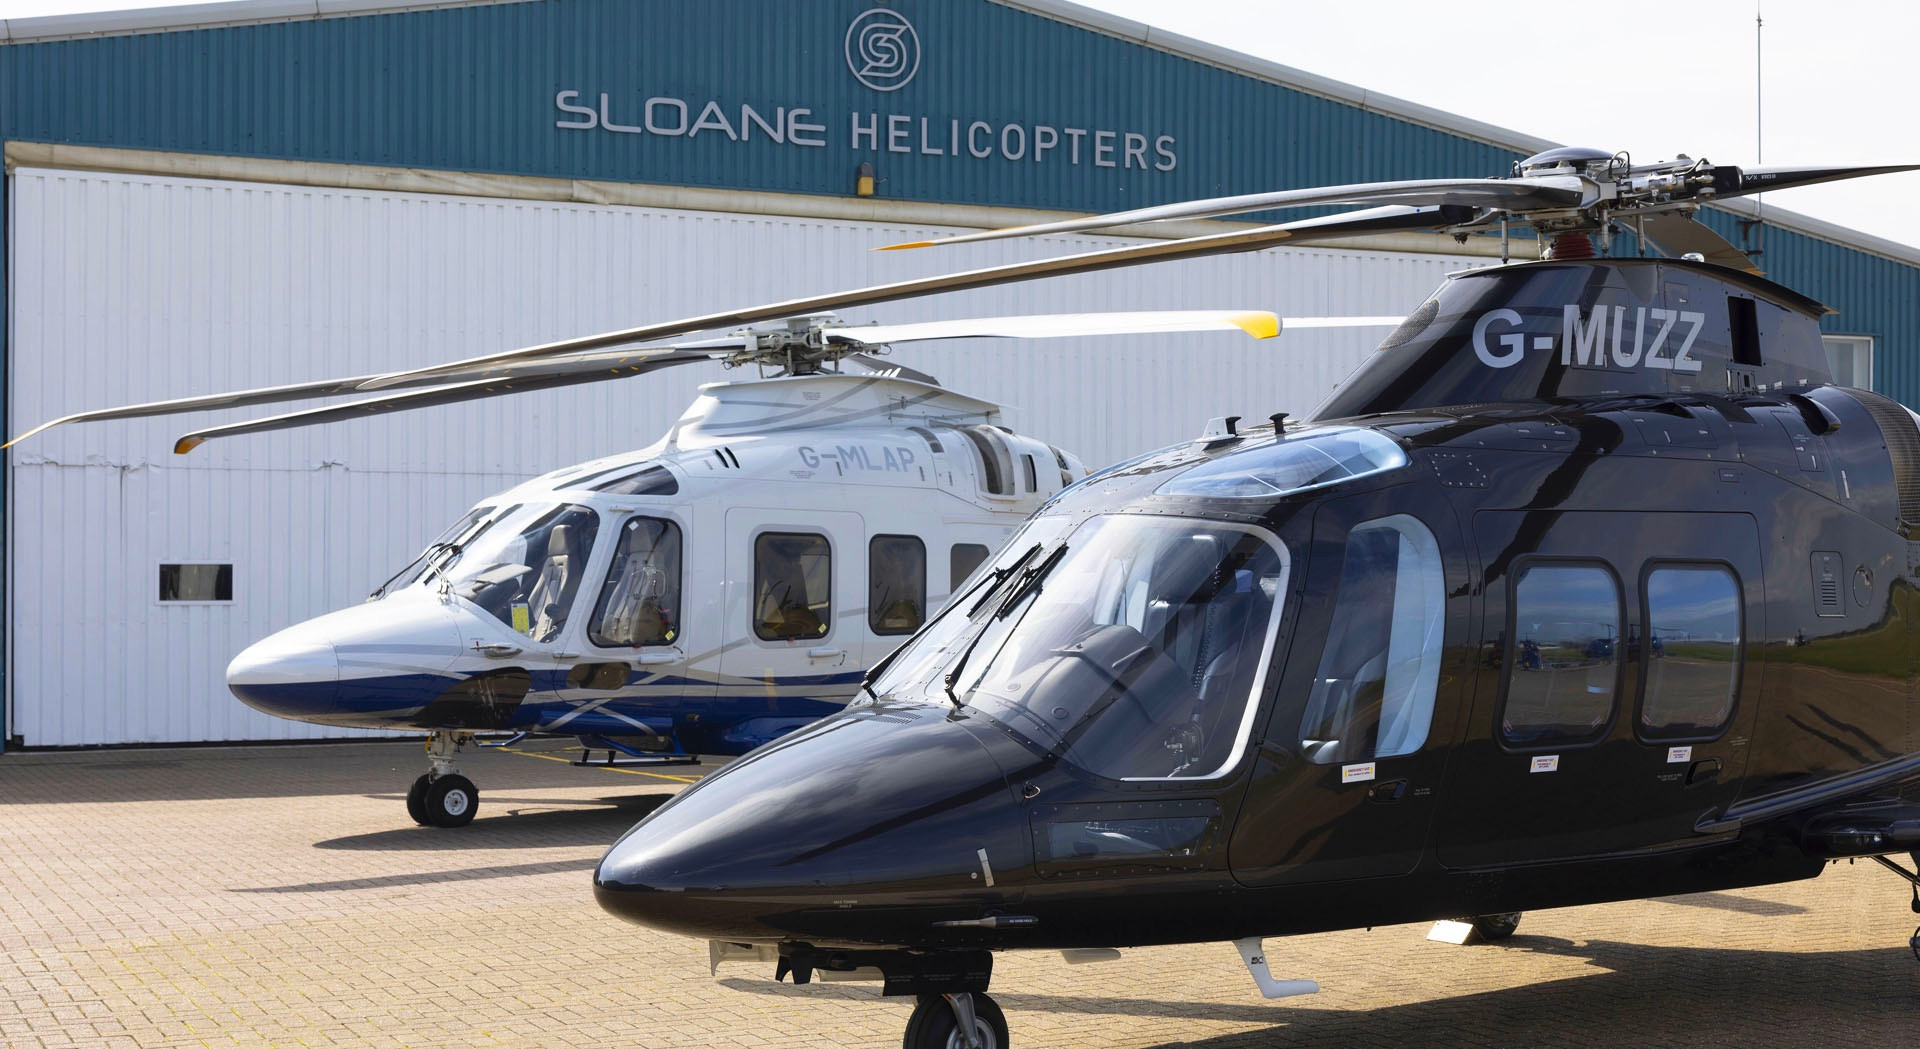 The Agusta VIP helicopter brand lands in the UK and Ireland’s VIP helicopter transport sector